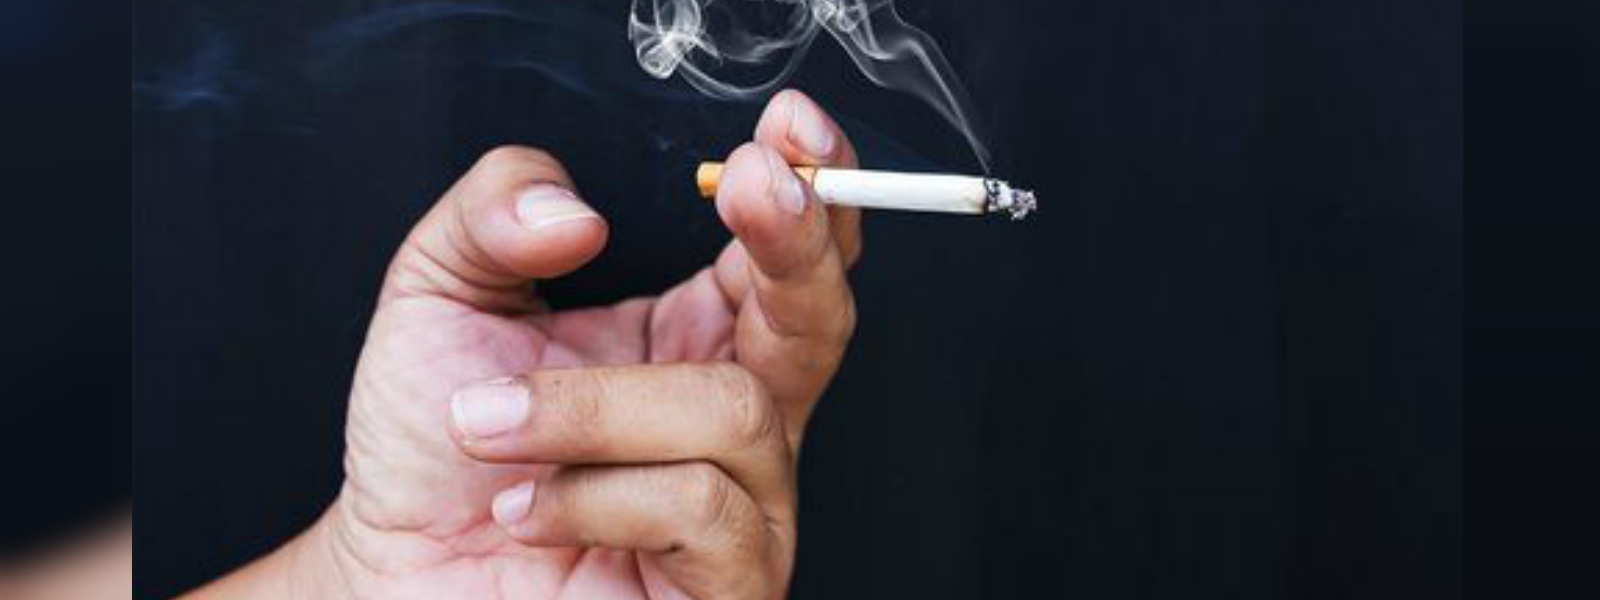 Indian arrested for possession of 360 cigarettes